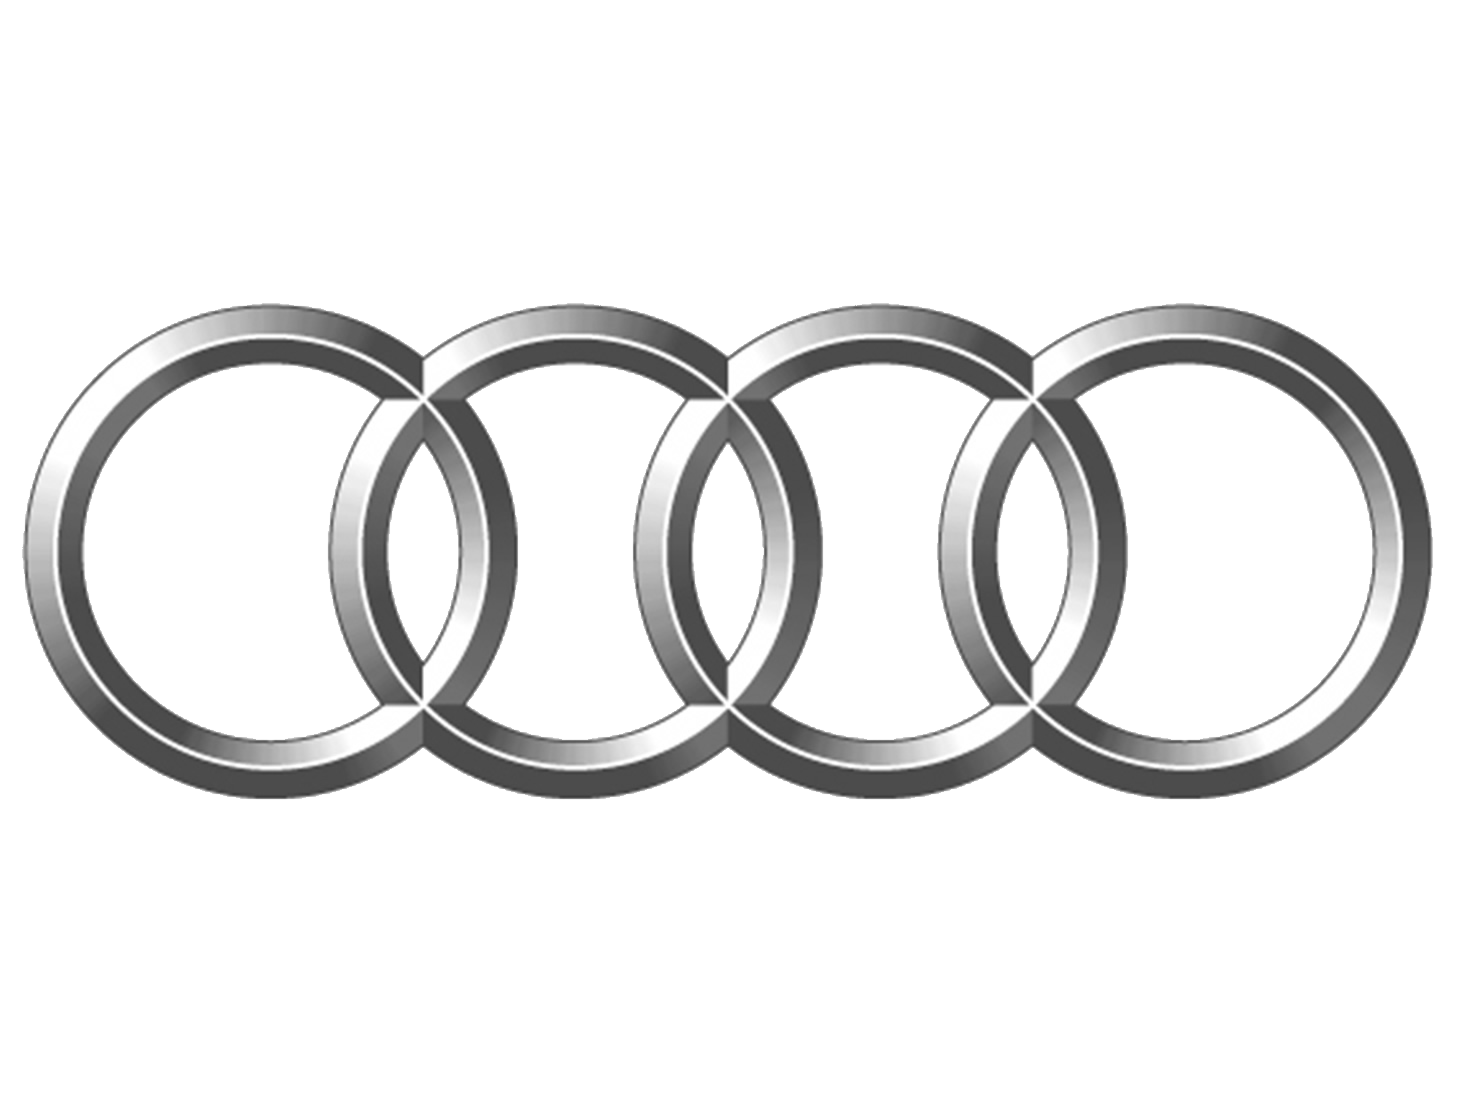 Audi Logo, Hd Png, Meaning, I